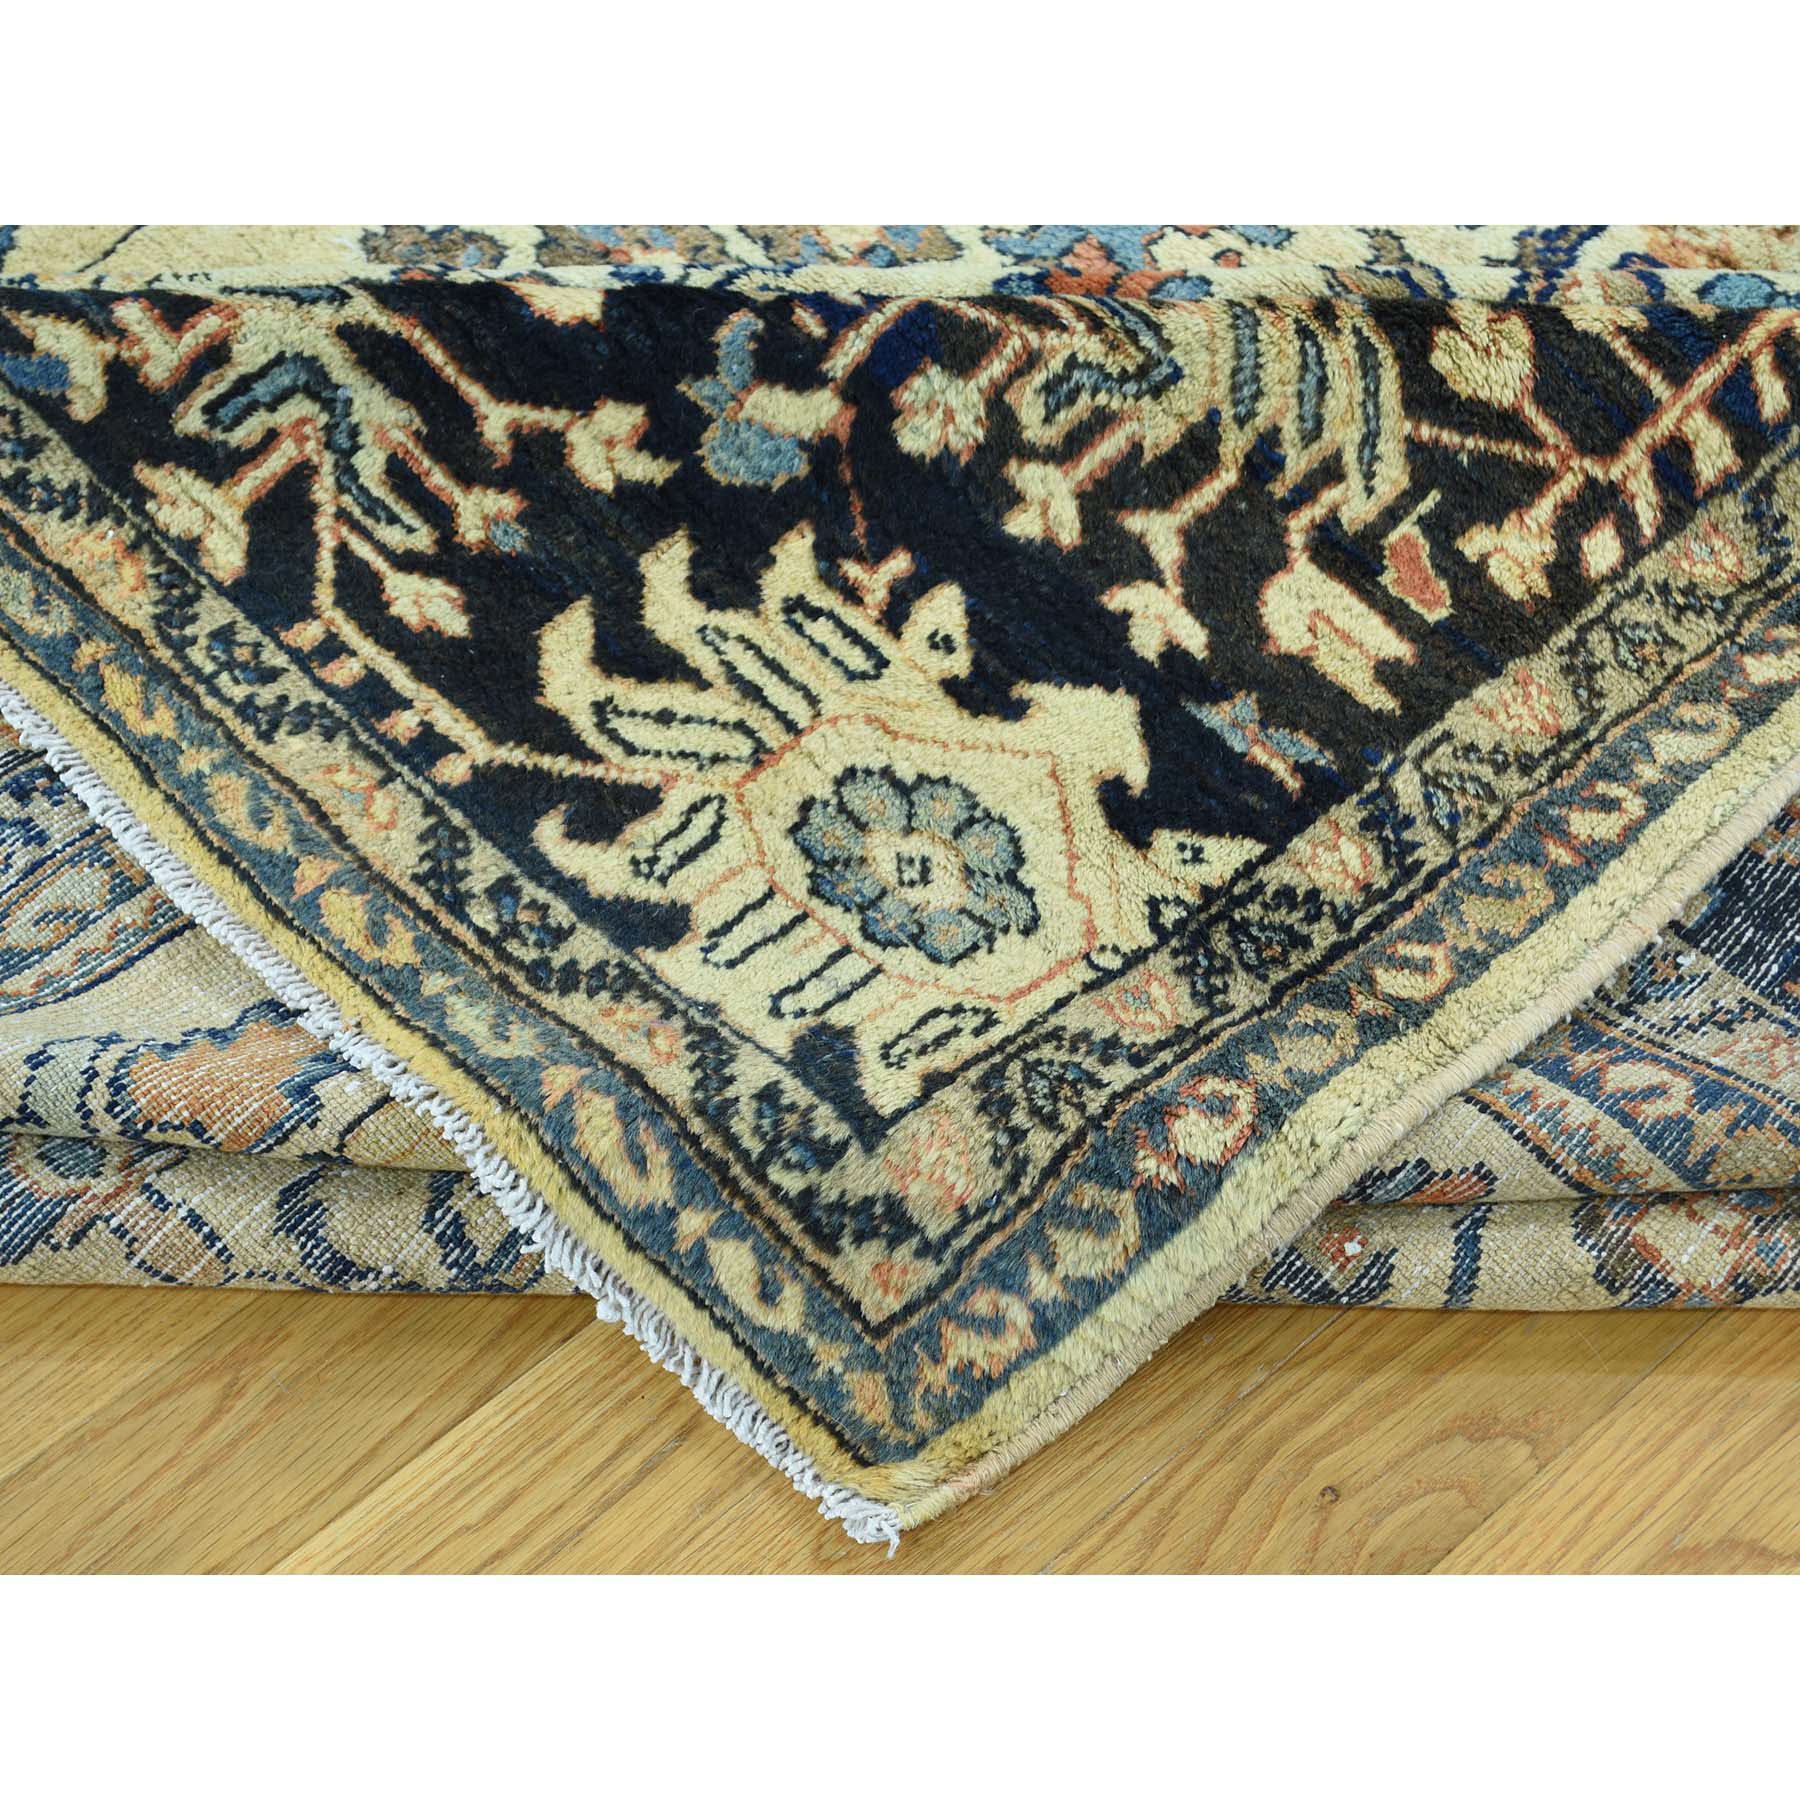 9-4 x11-10  Handmade Antique Persian Lilahan Mint Cond Full Pile Rug 